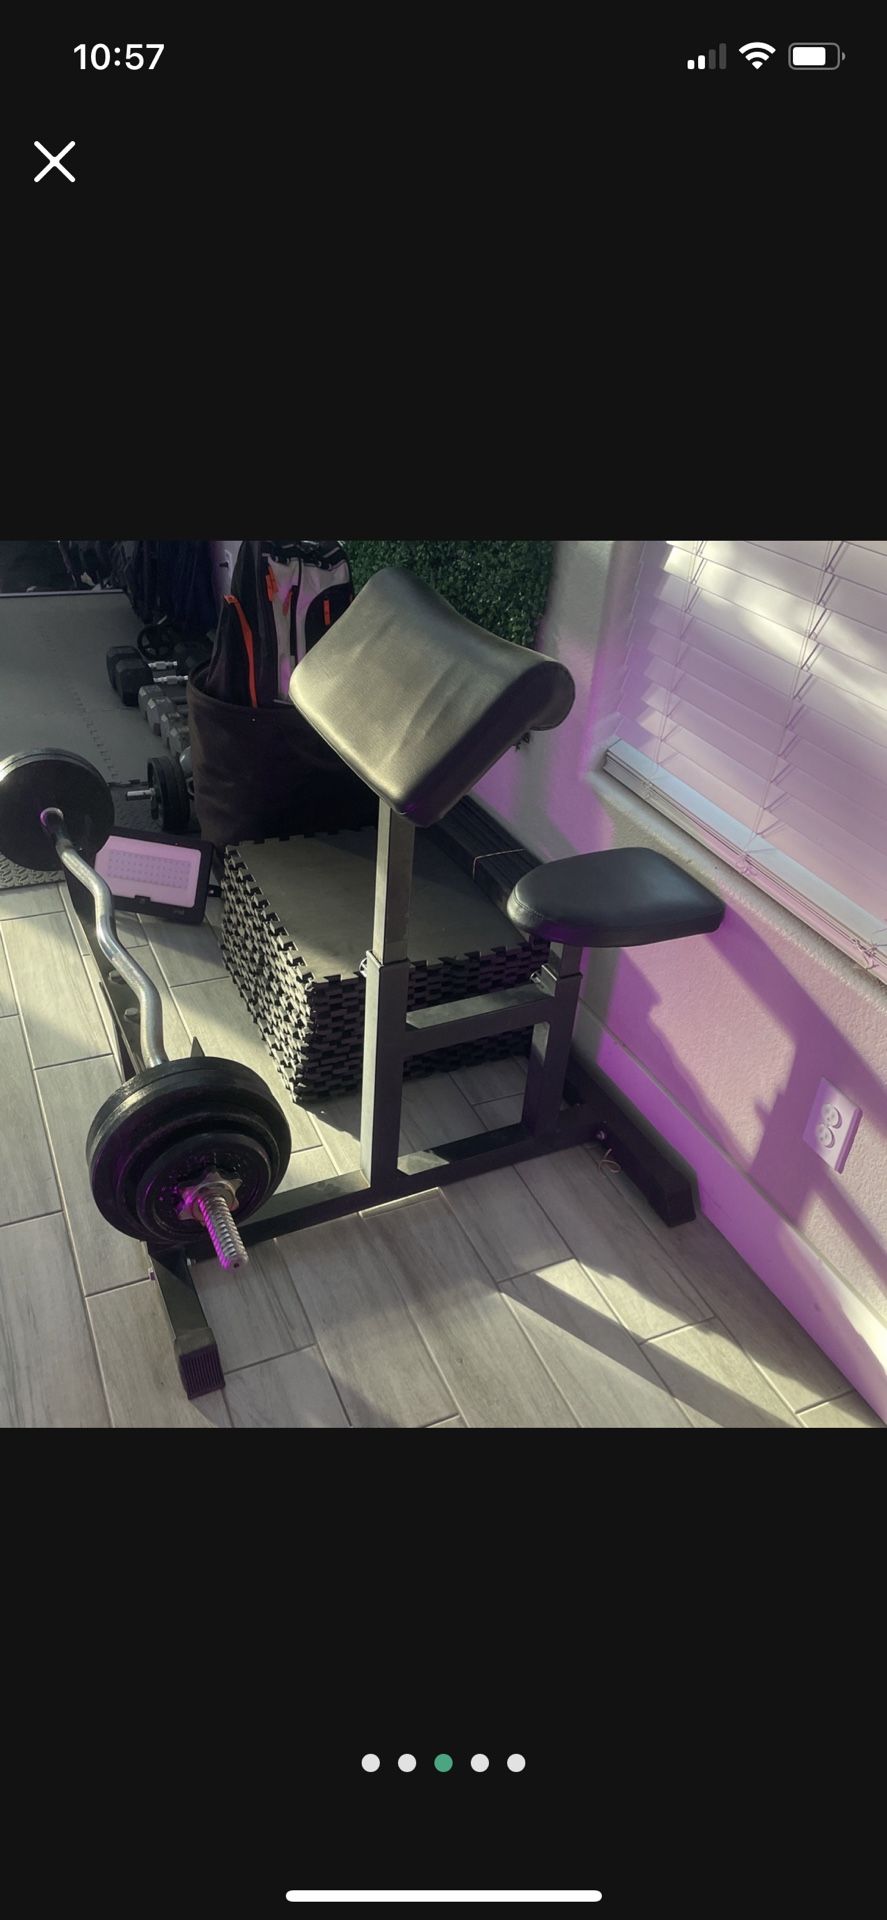 Preacher Curl Machine And EZ Curl Bar With Weights